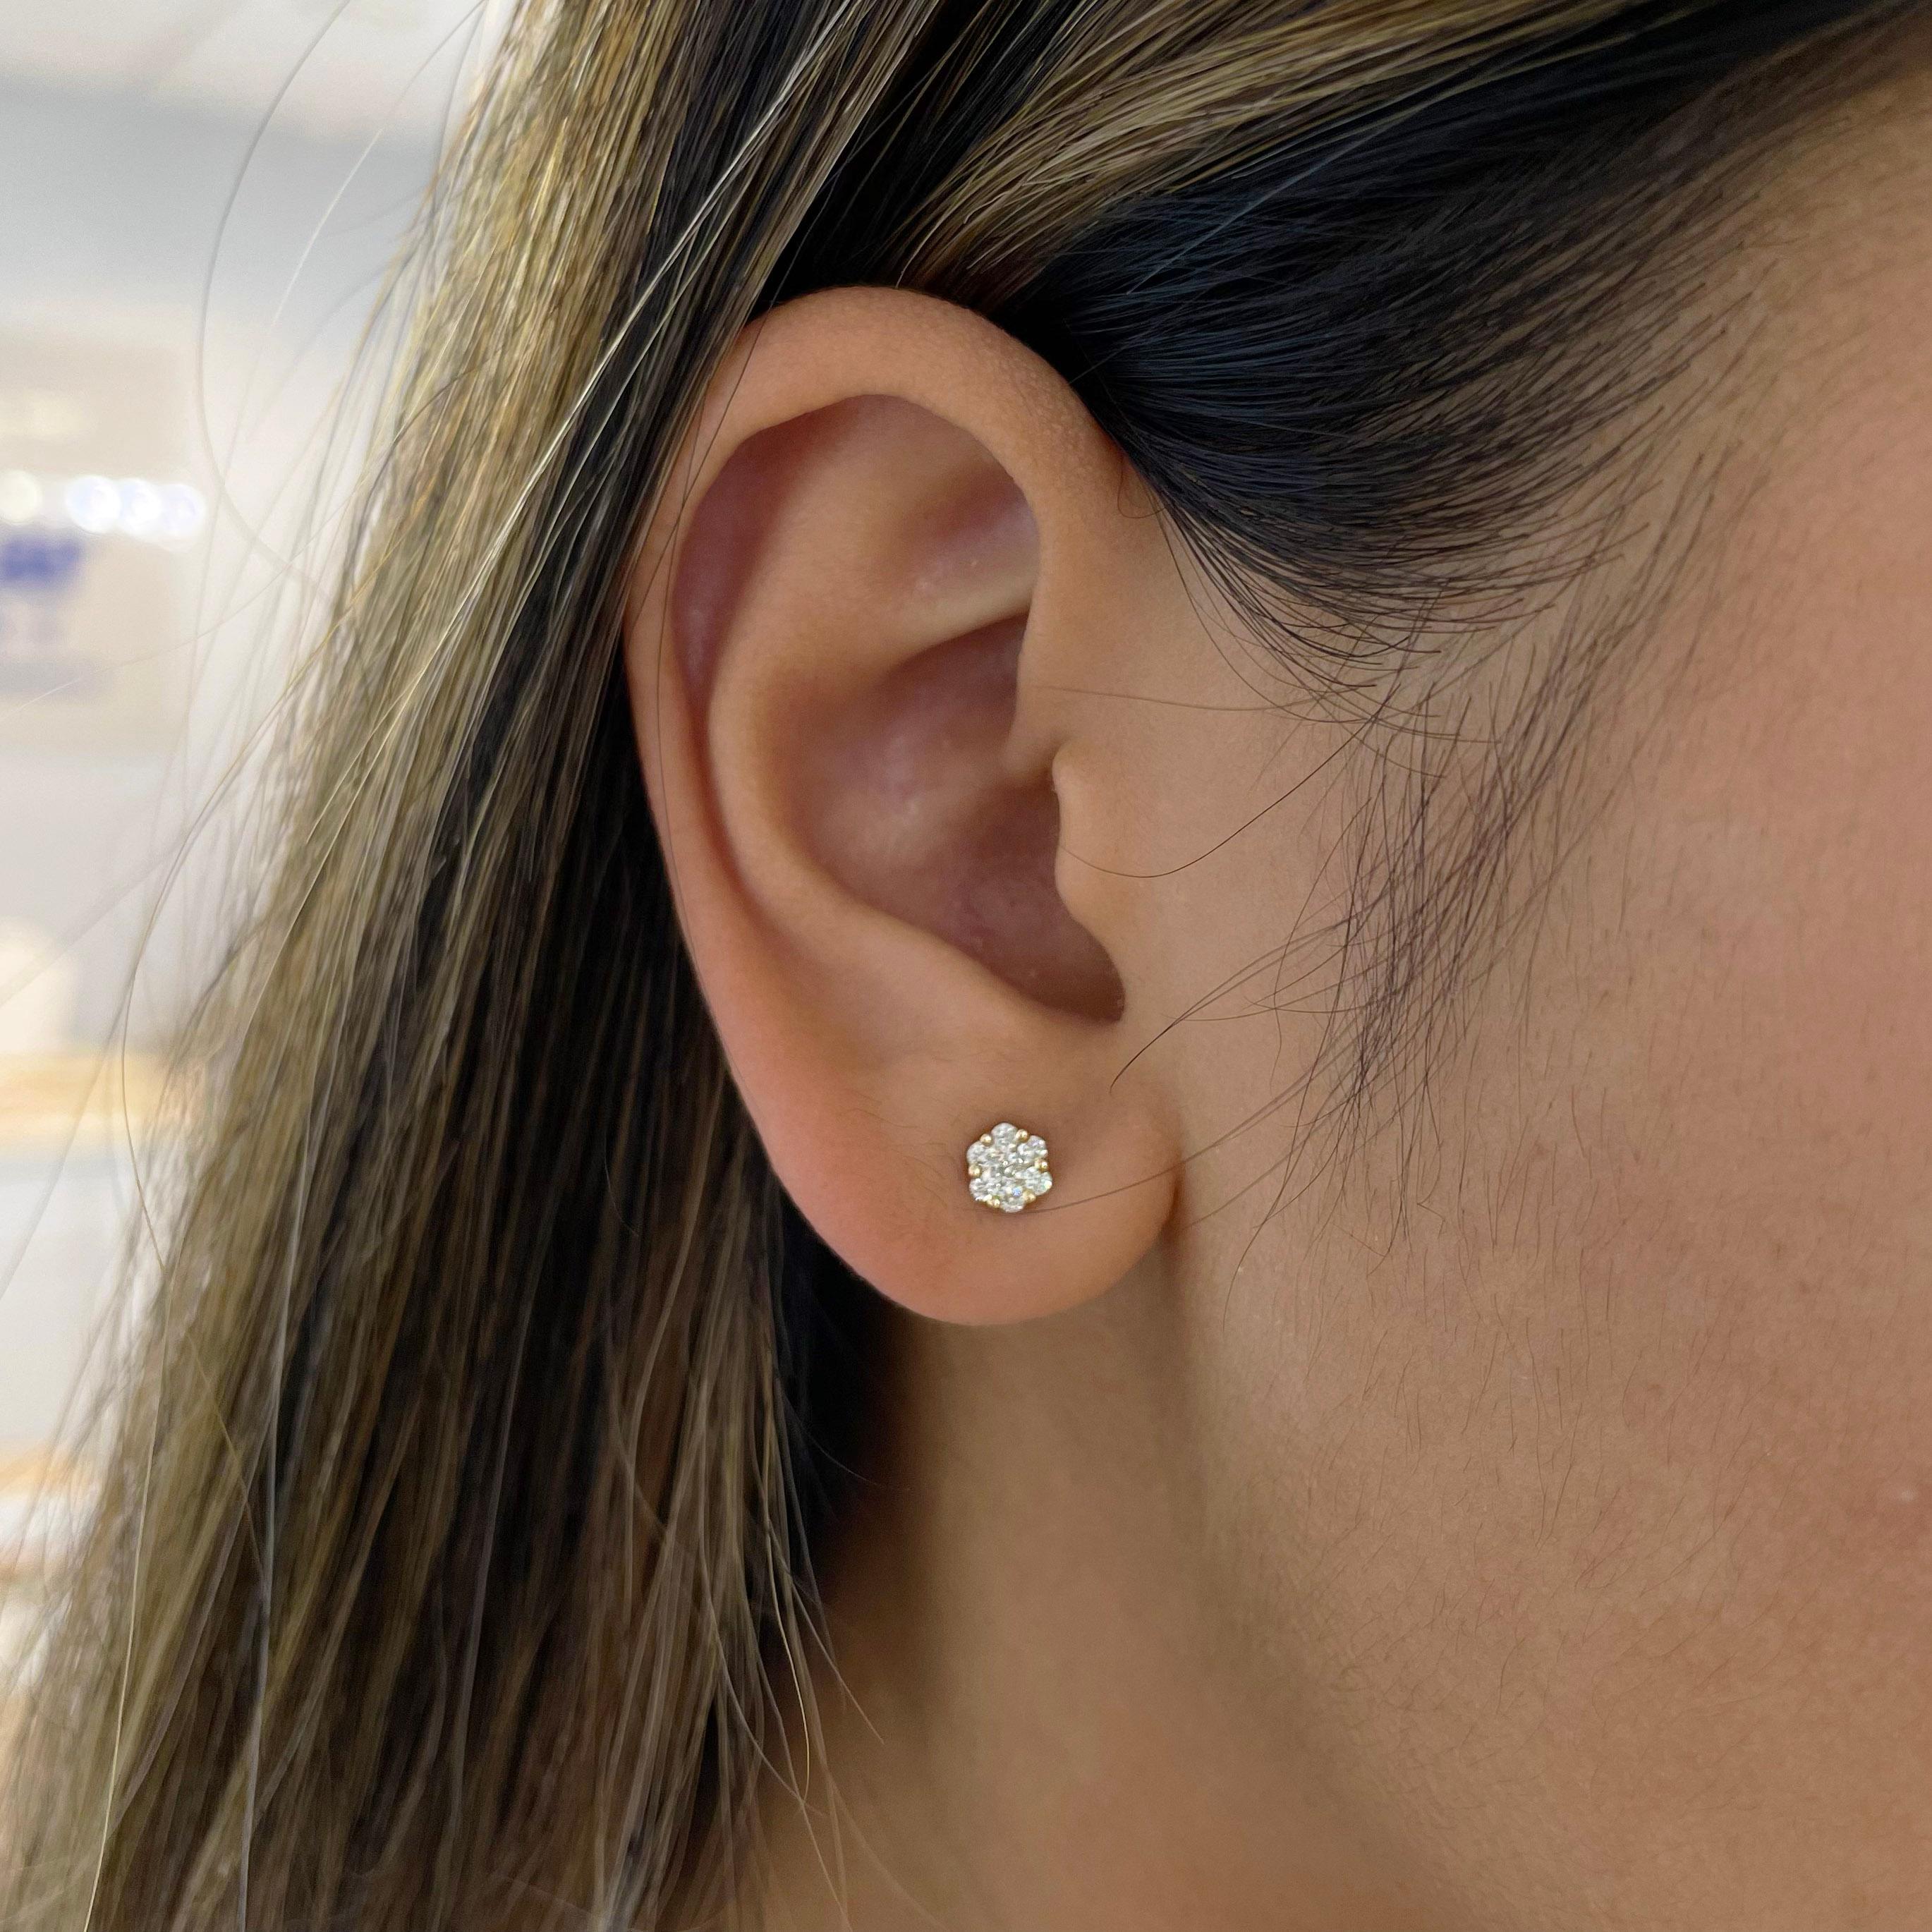 Diamond stud earrings make the best addition to any jewelry collection. These clustered diamond studs are the same size as 1/2 carat studs, made affordable by the petite floral cluster of diamonds. The layered design of the diamonds also adds to the